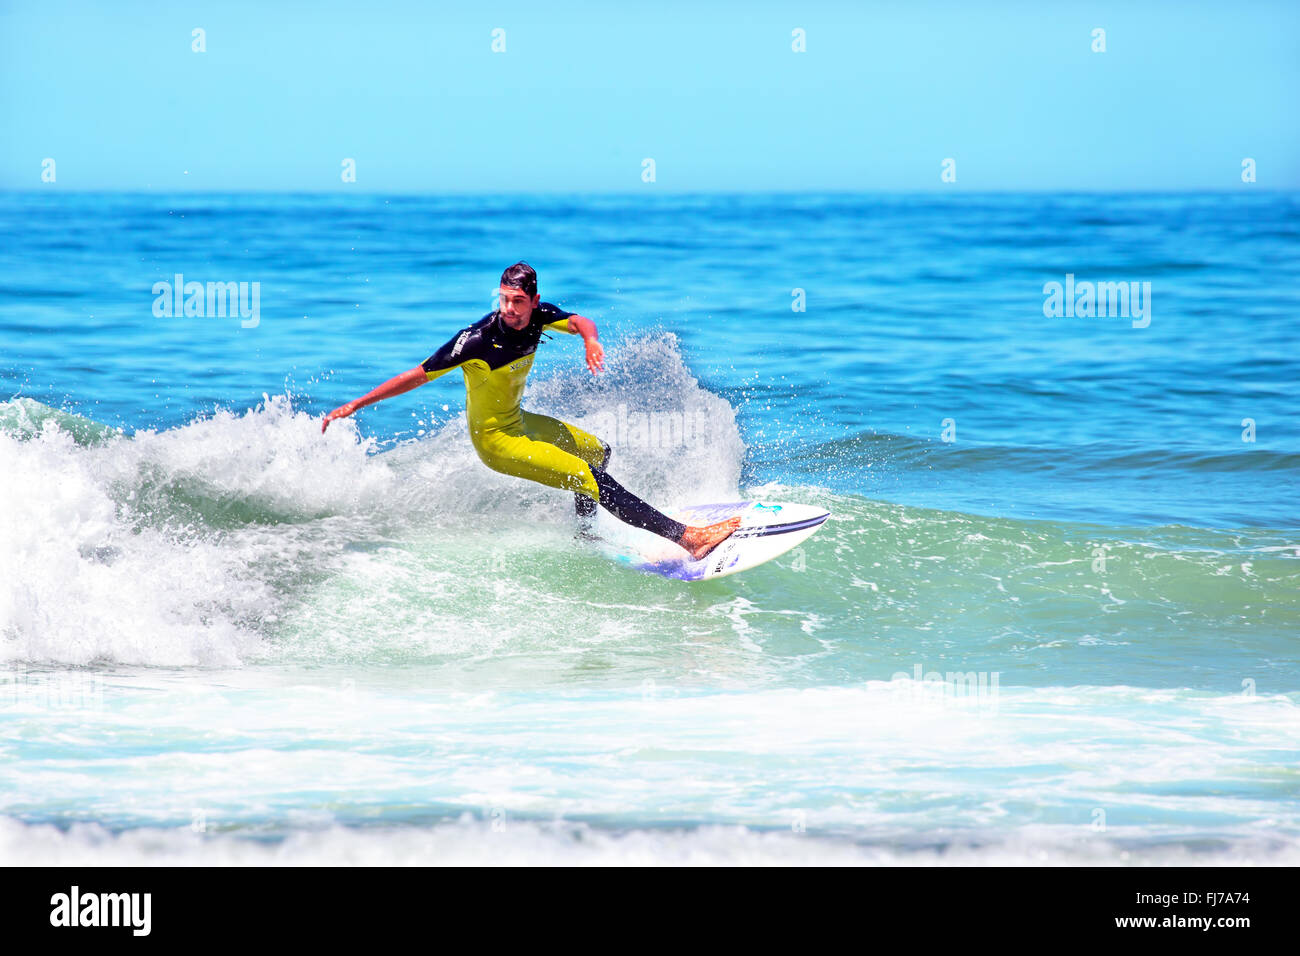 VALE FIGUEIRAS - AUGUST 20: Professional surfer surfing a wave on august 20 2014 at Vale Figueiras in Portugal Stock Photo